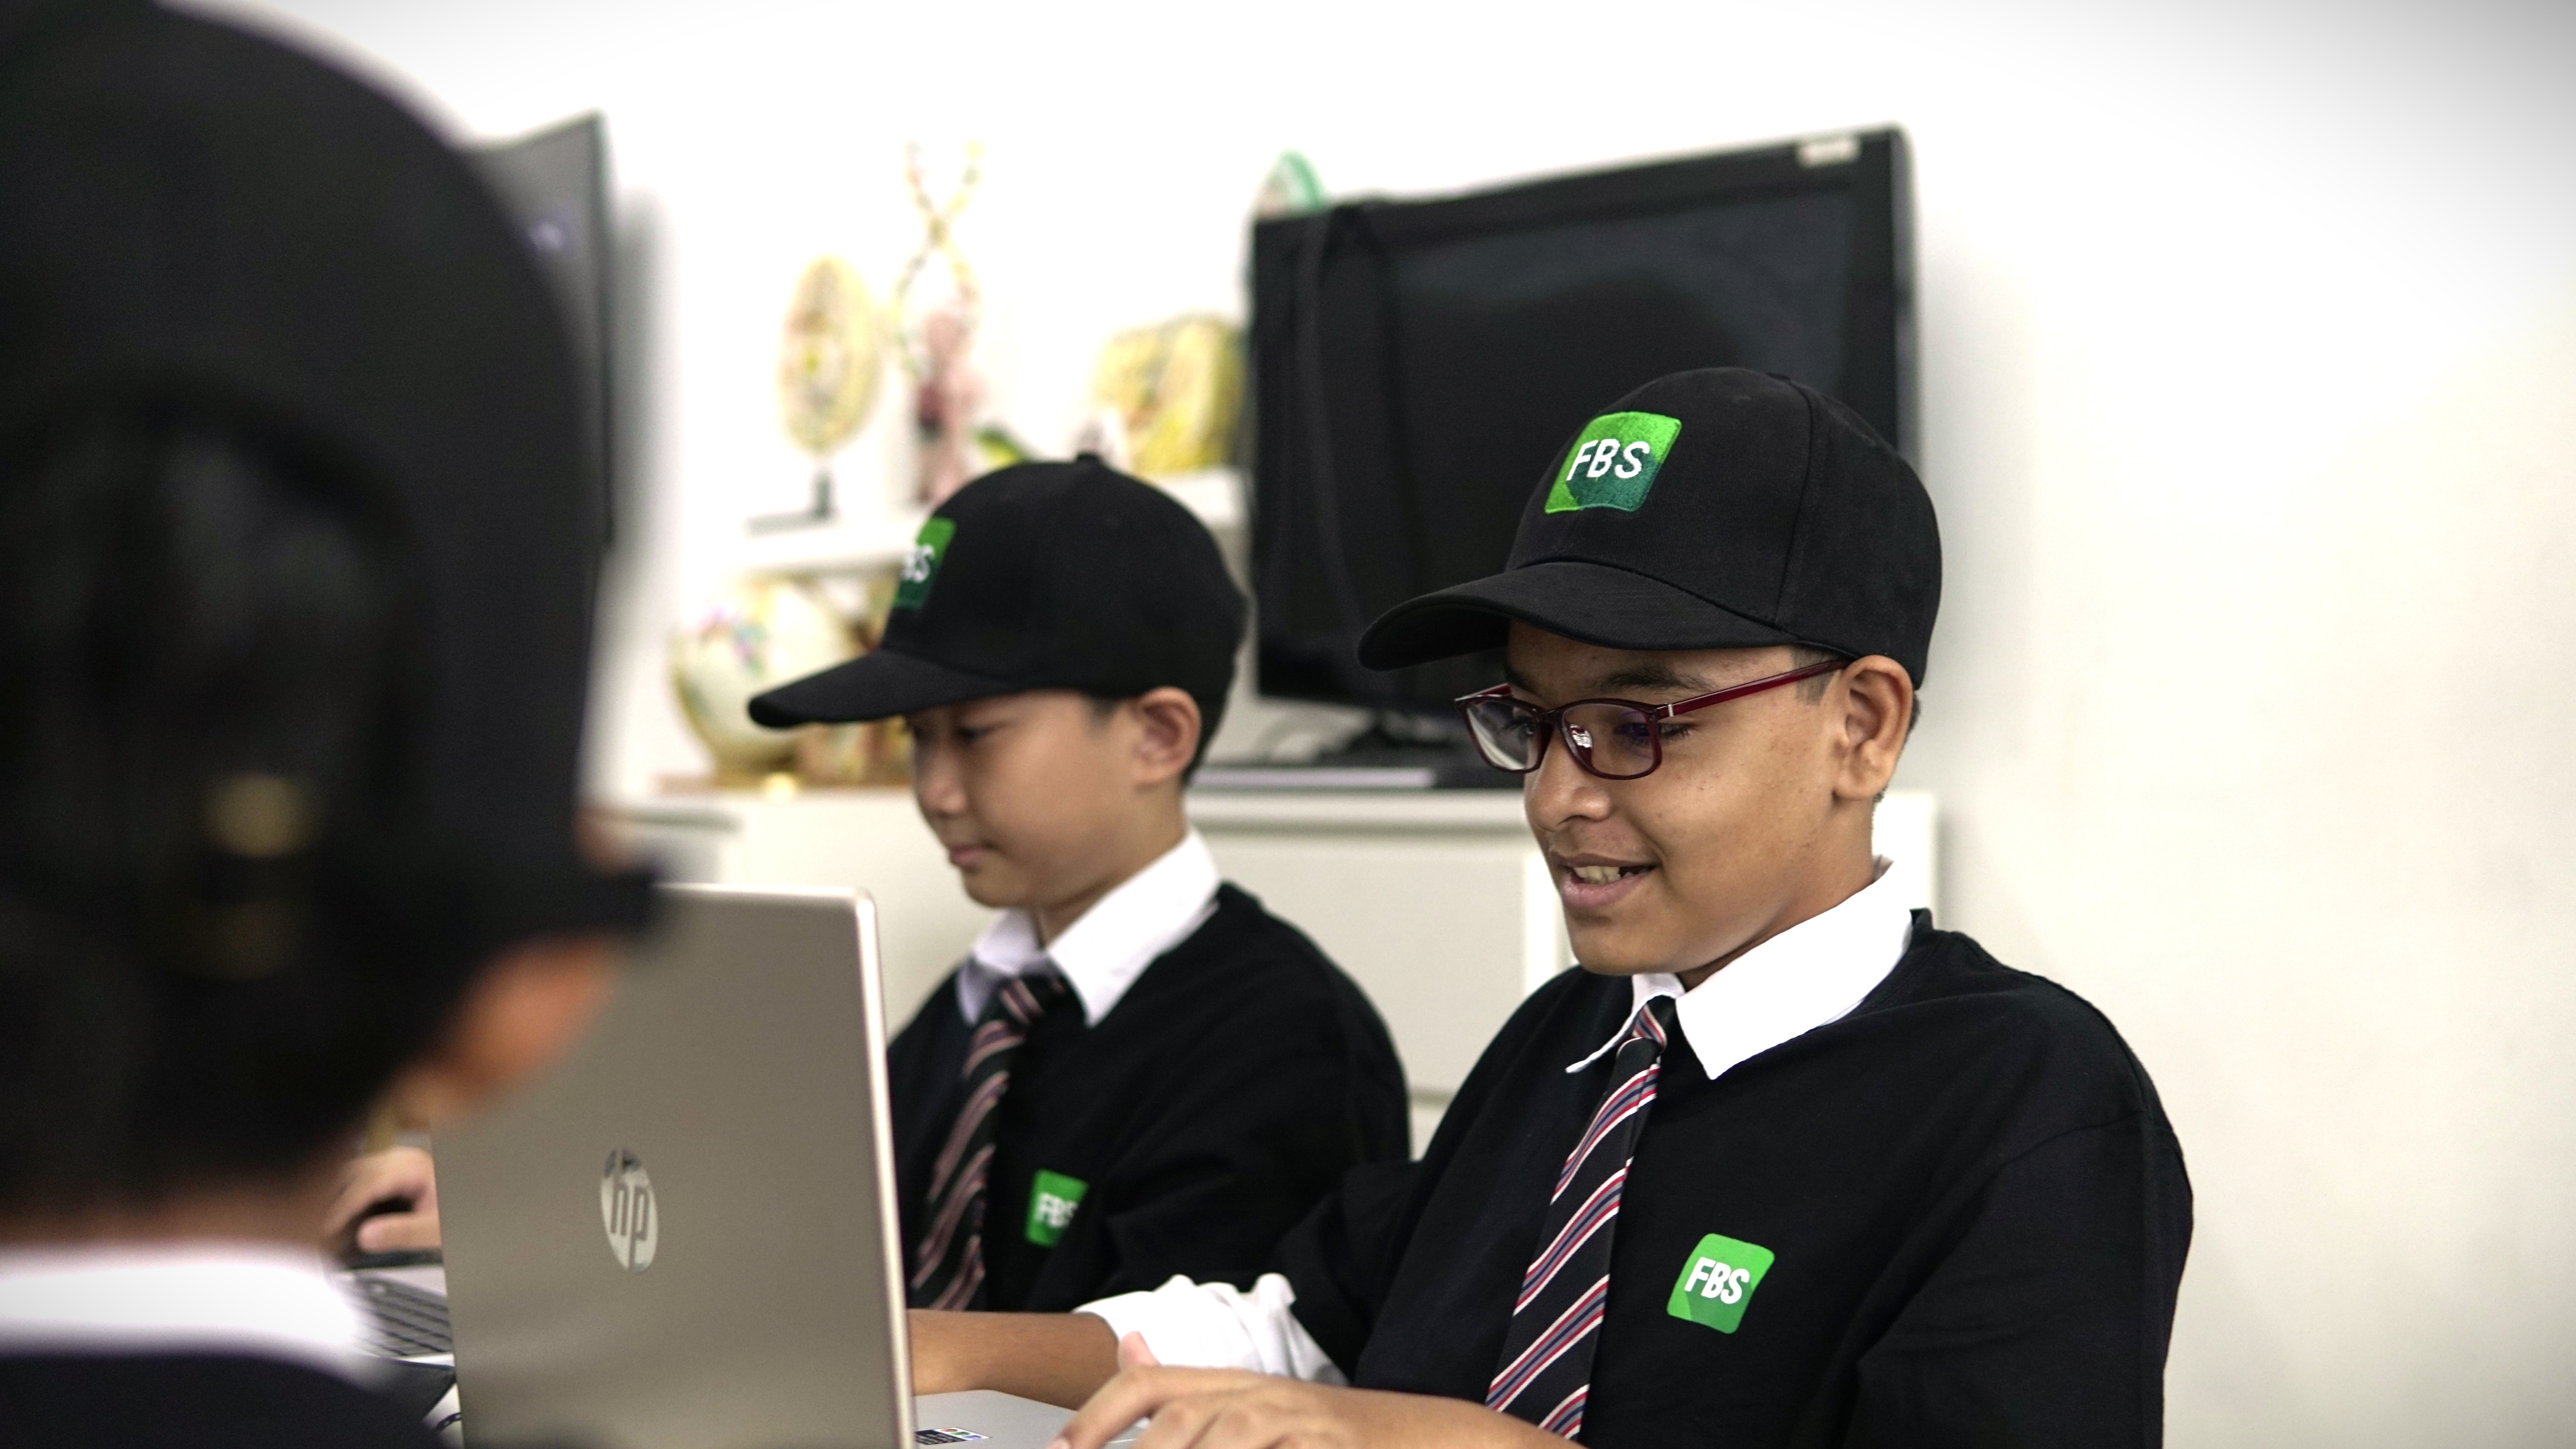 fbs and dignity for children foundation enhance educational facilities in a kuala lumpur school